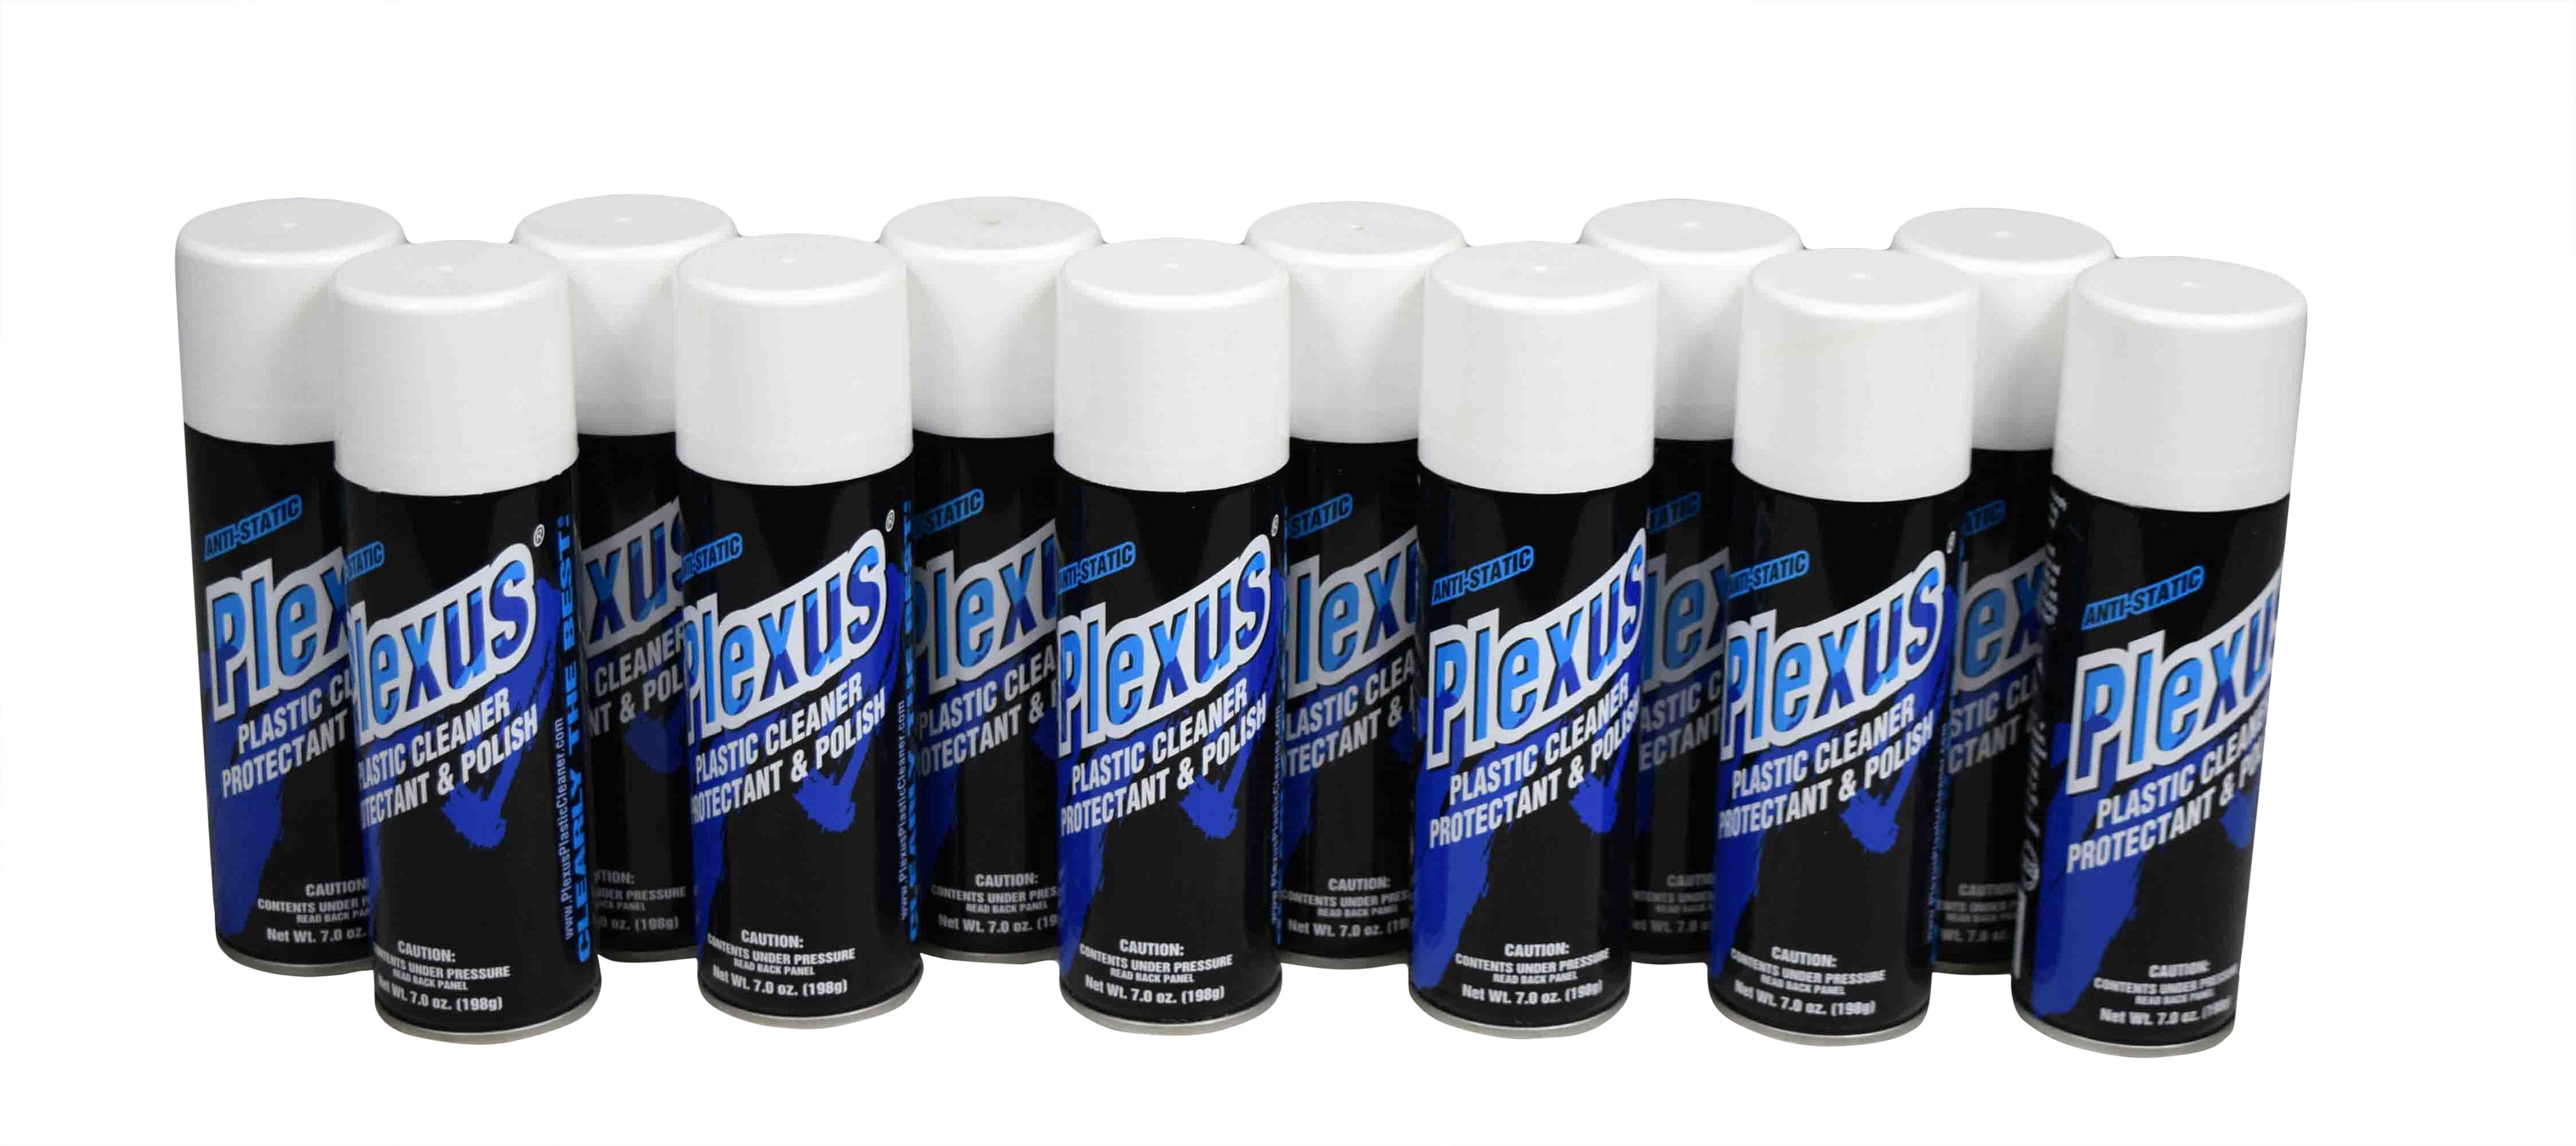 Plexus Plastic Cleaner Protectant & Polish 7oz Can 12 Pack MADE In the USA